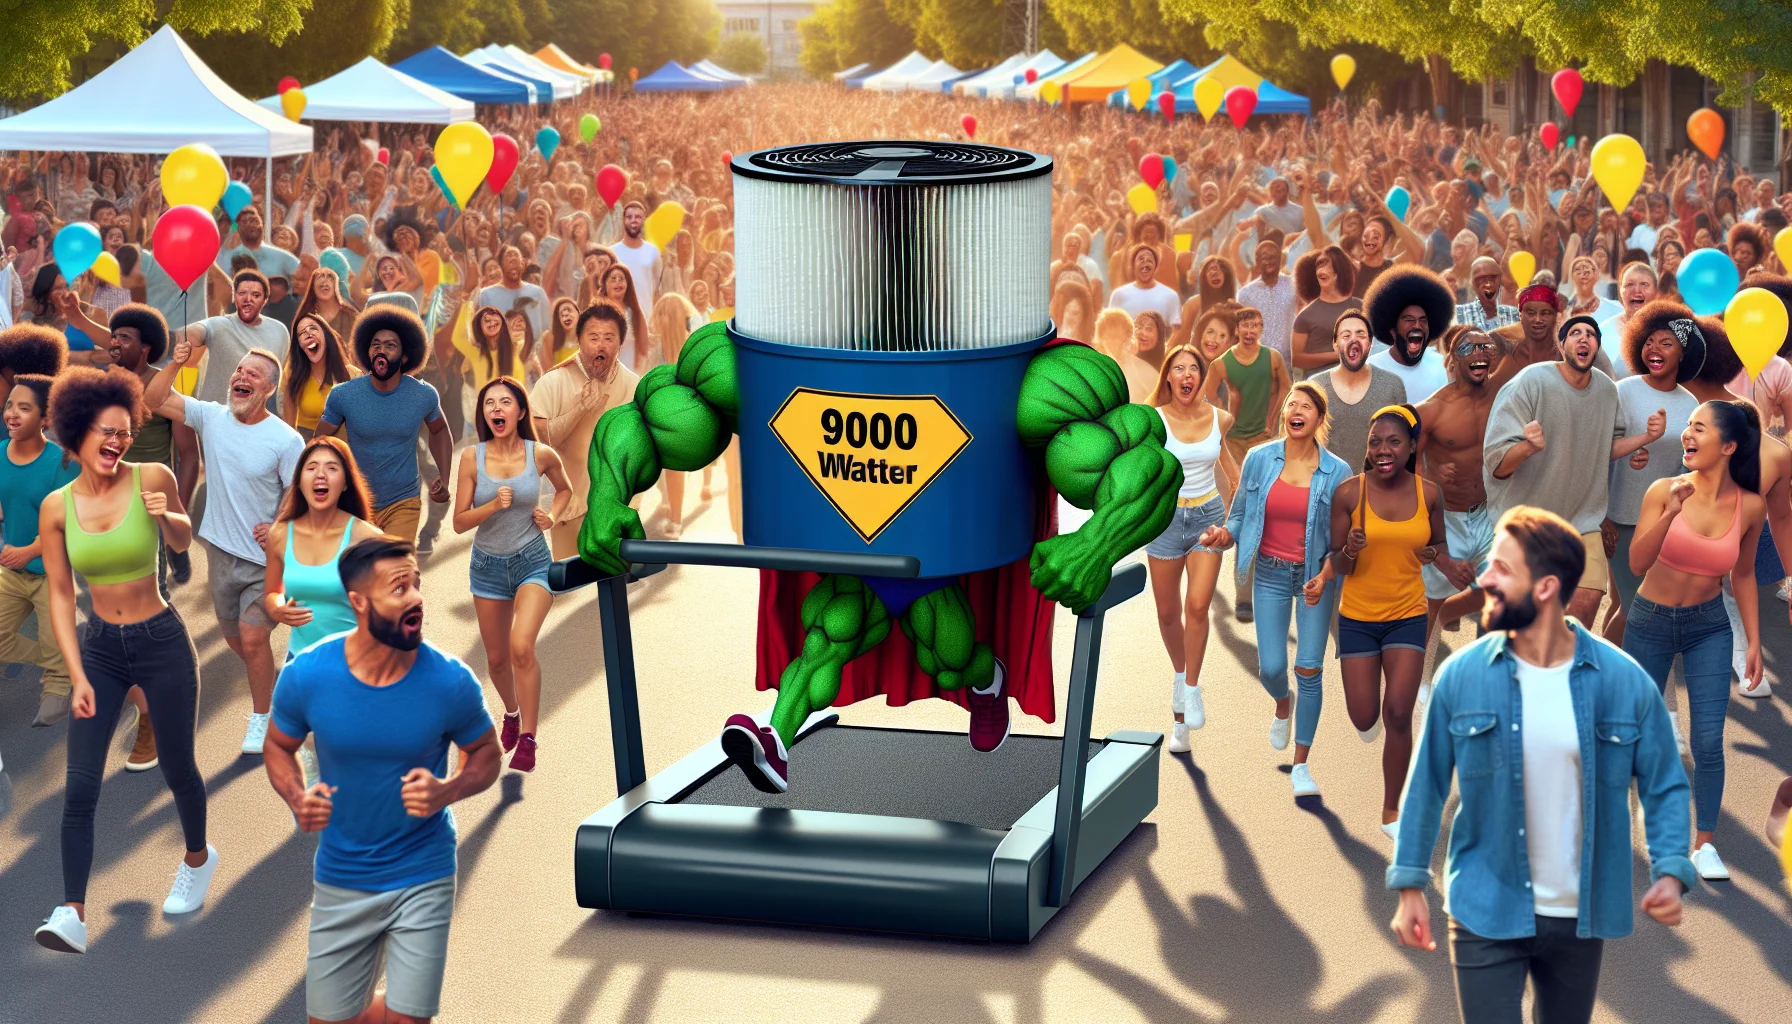 Generate a vibrant and visually appealing image where a 9000 Watt filter is personified in a humorous situation. Let's imagine this filter as a muscular character wearing a superhero costume, creatively playing with a treadmill to generate electricity. Around the filter, depict an enthusiastic crowd comprising of diverse individuals of different genders and descents such as Caucasian, Black, Hispanic, Middle-Eastern, and South-Asian, all amazed and inspired by the 'Power Filter's' unique capability of generating electricity. The scene should be set outdoors during the day, rending a lively and eco-friendly fair atmosphere.